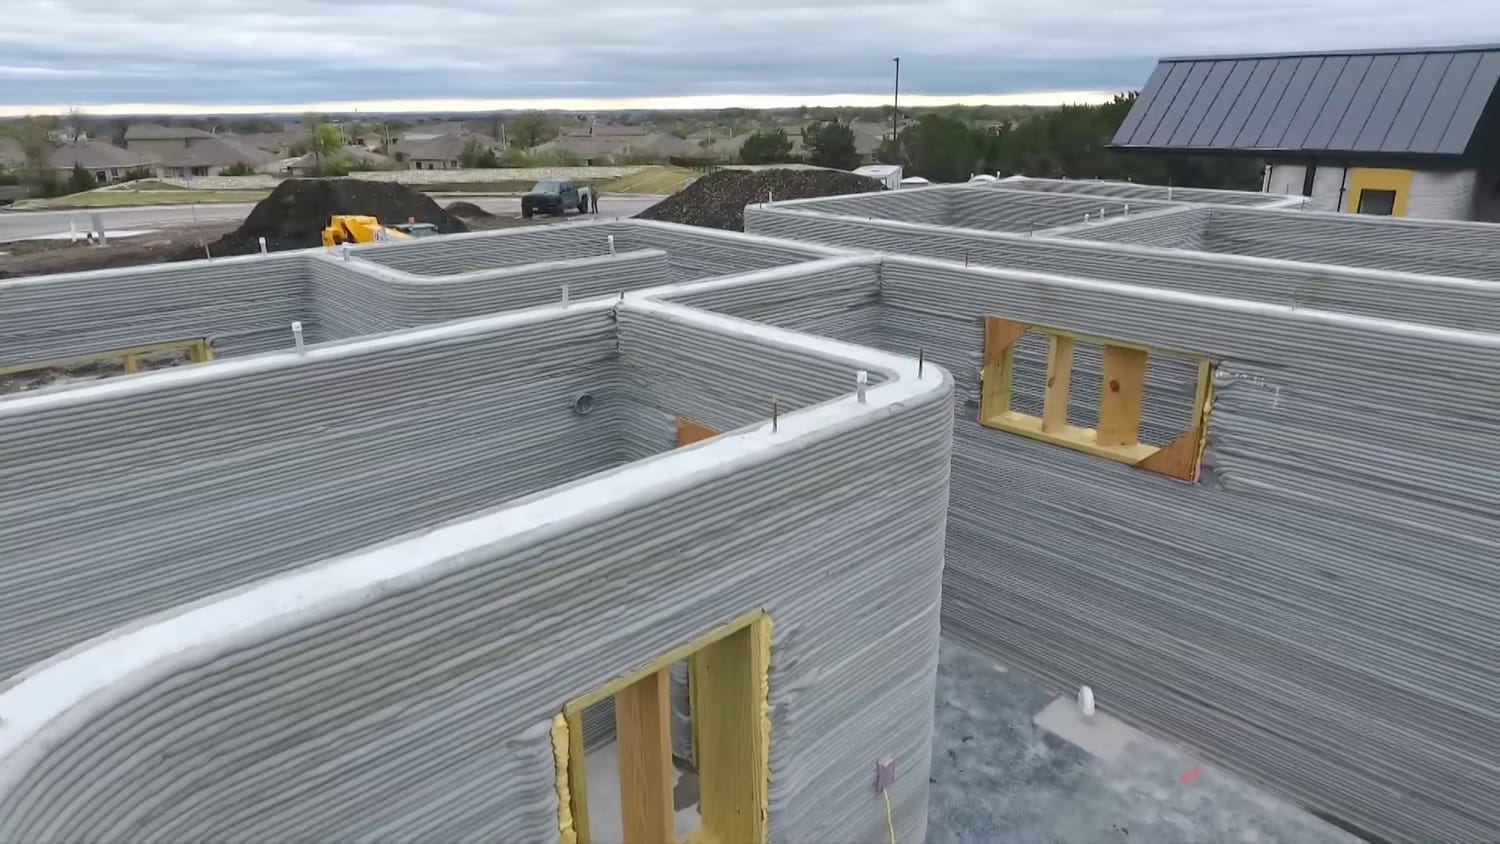 Mand Modsatte forberede Companies using 3D printing to build houses at half the cost